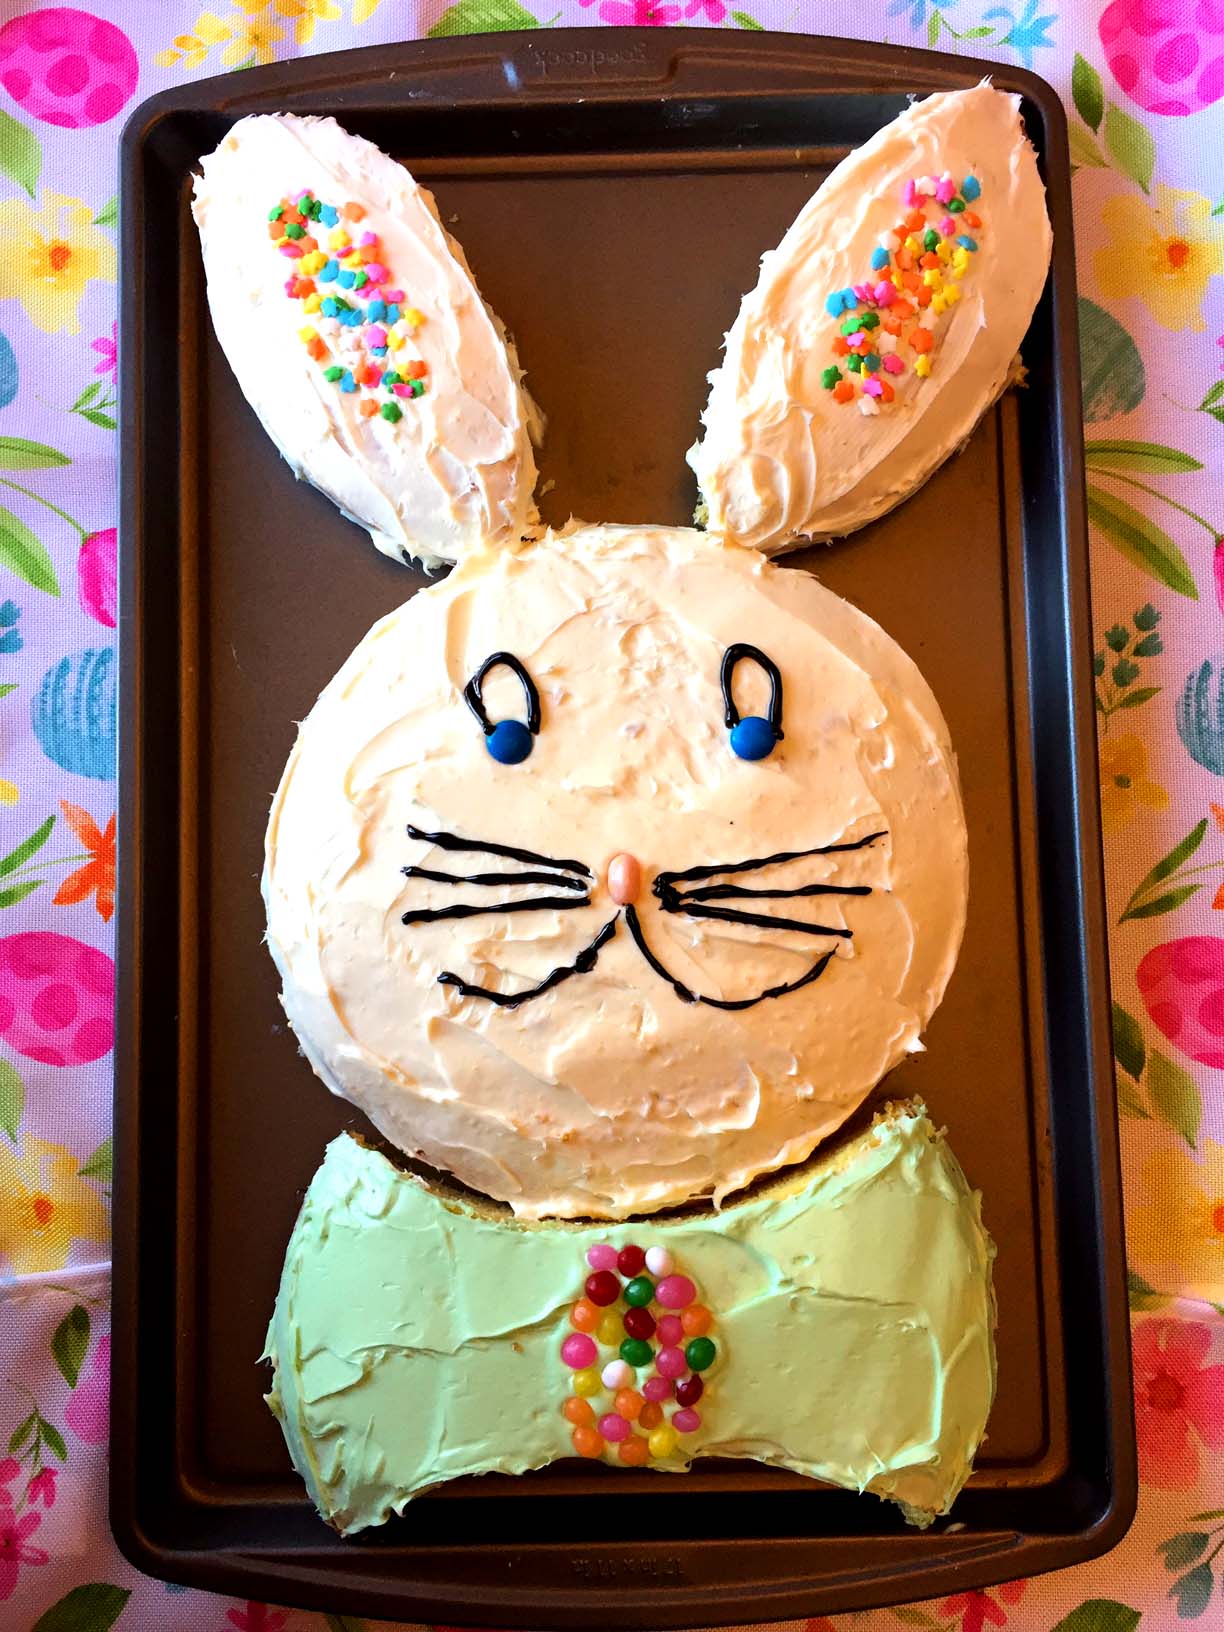 how to make easter bunny cake